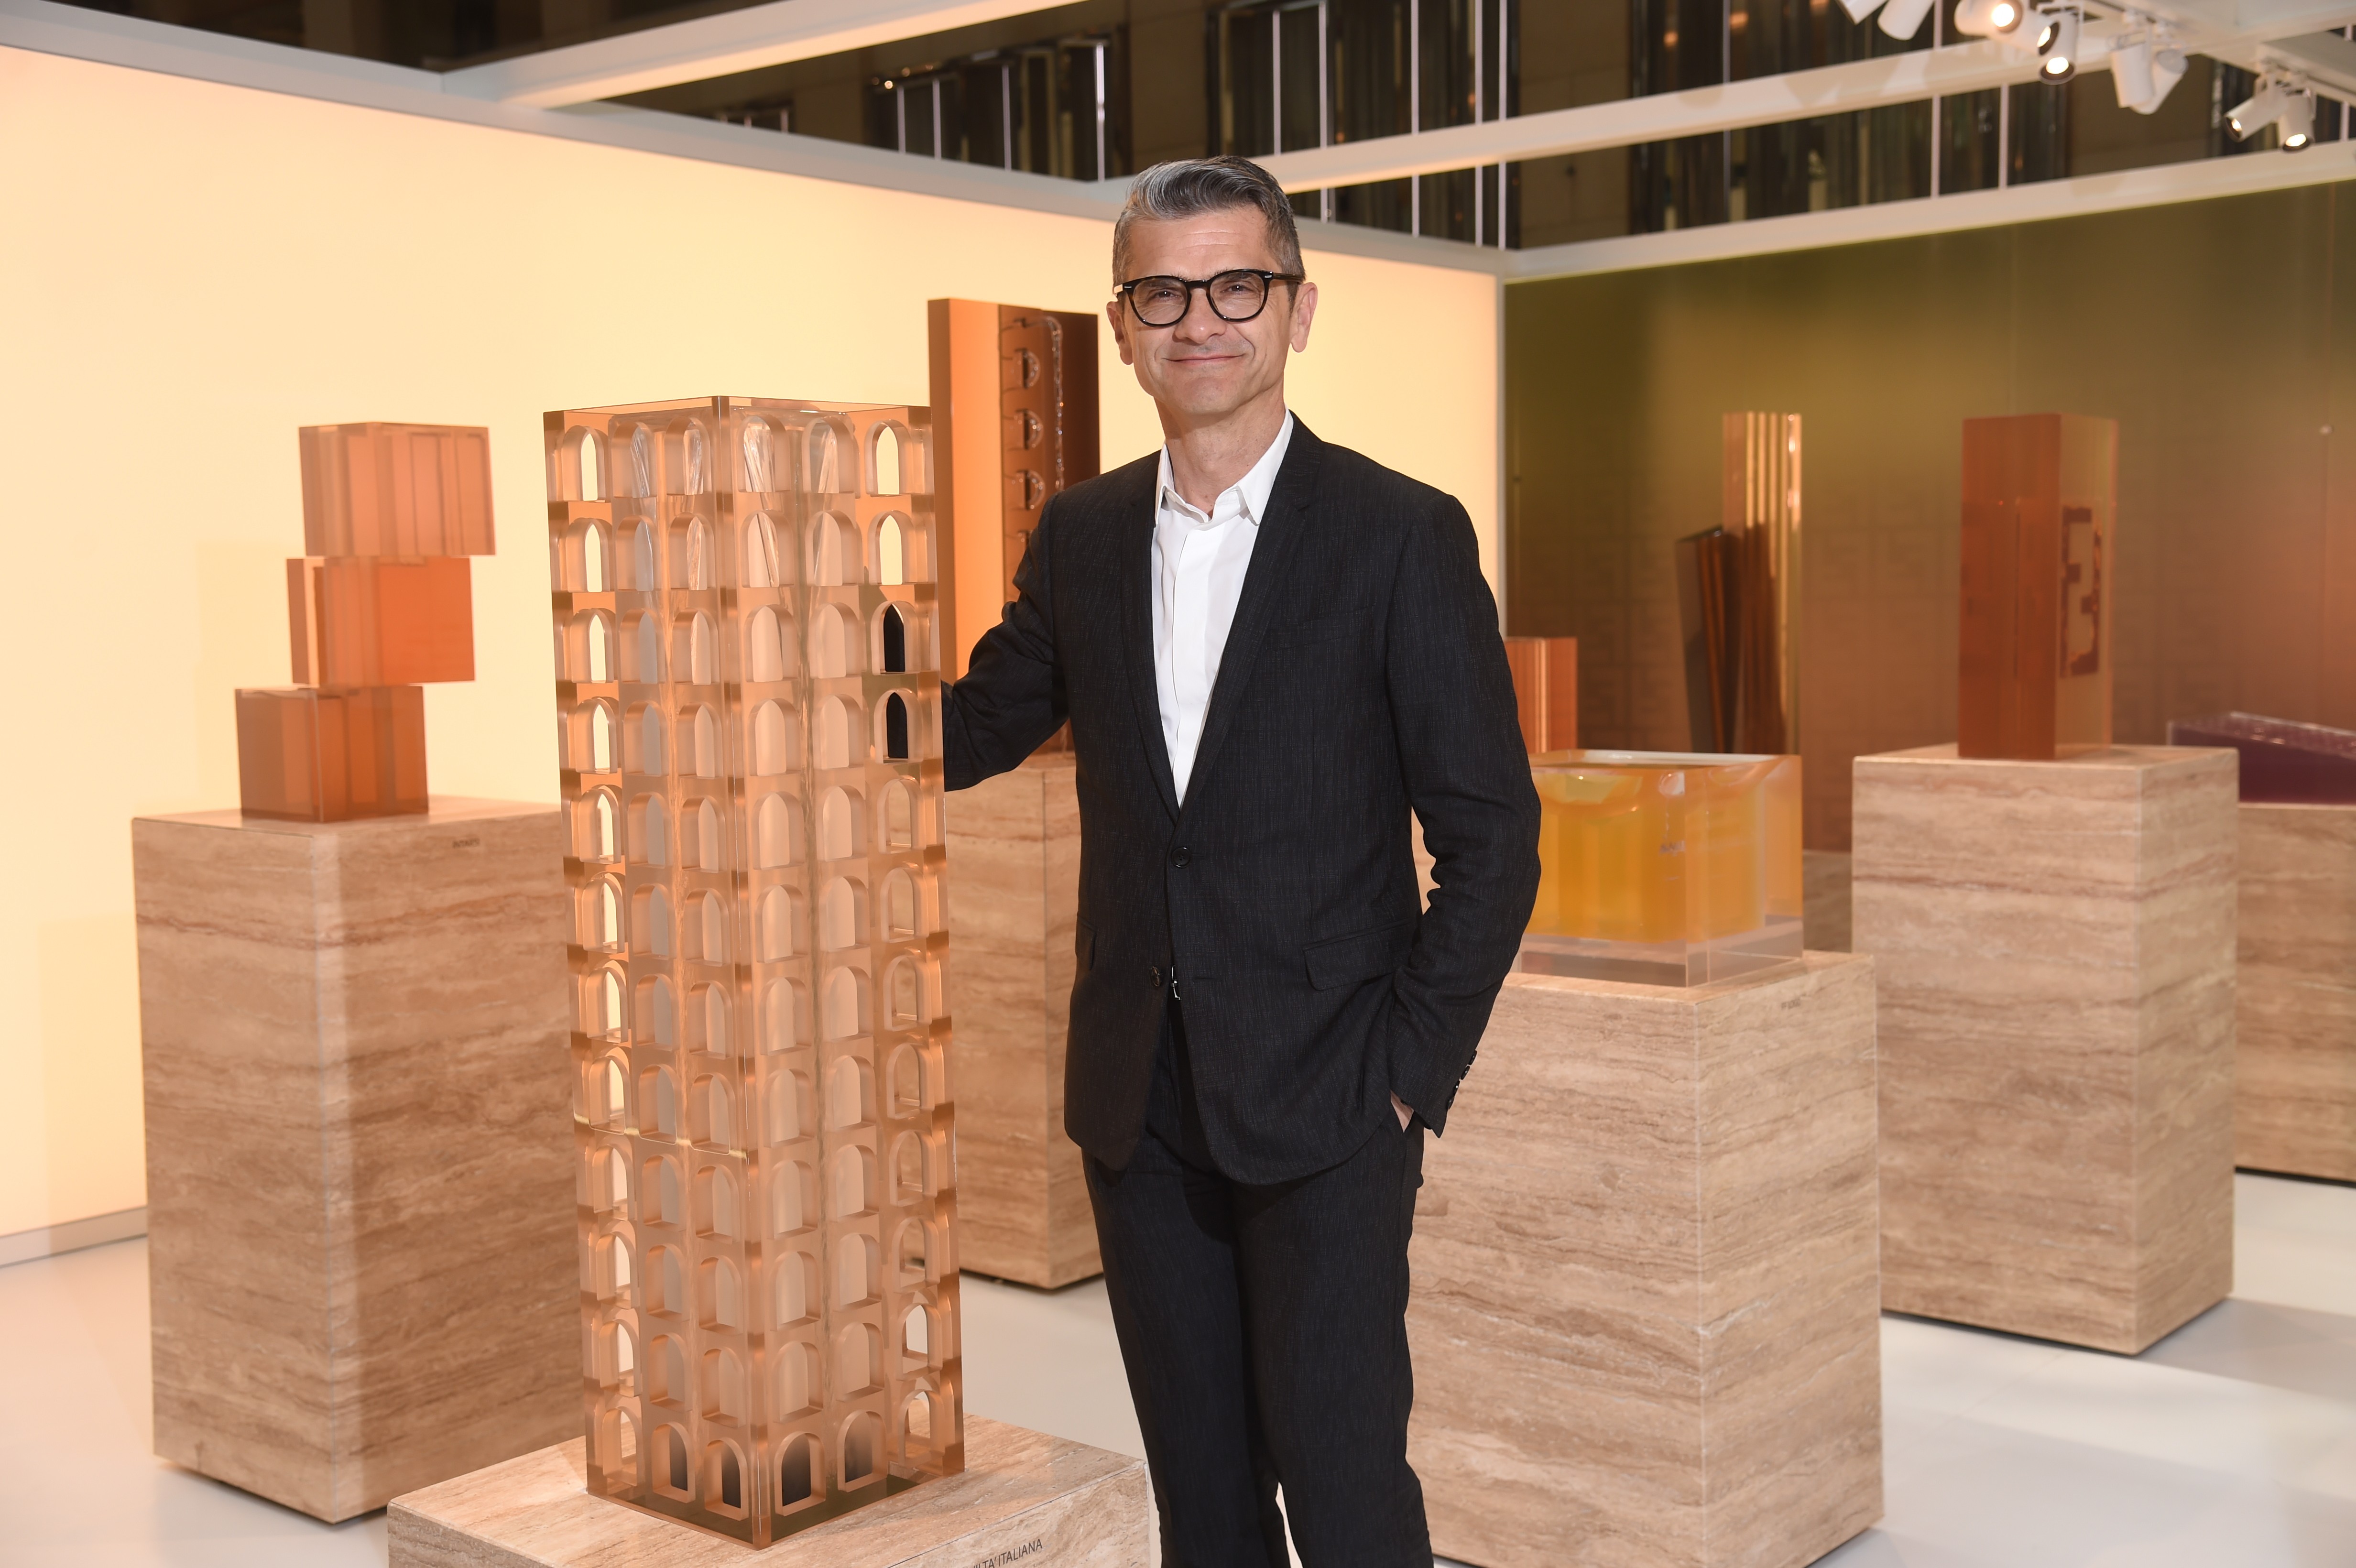 LVMH names Serge Brunschwig as new Chairman and CEO of Fendi